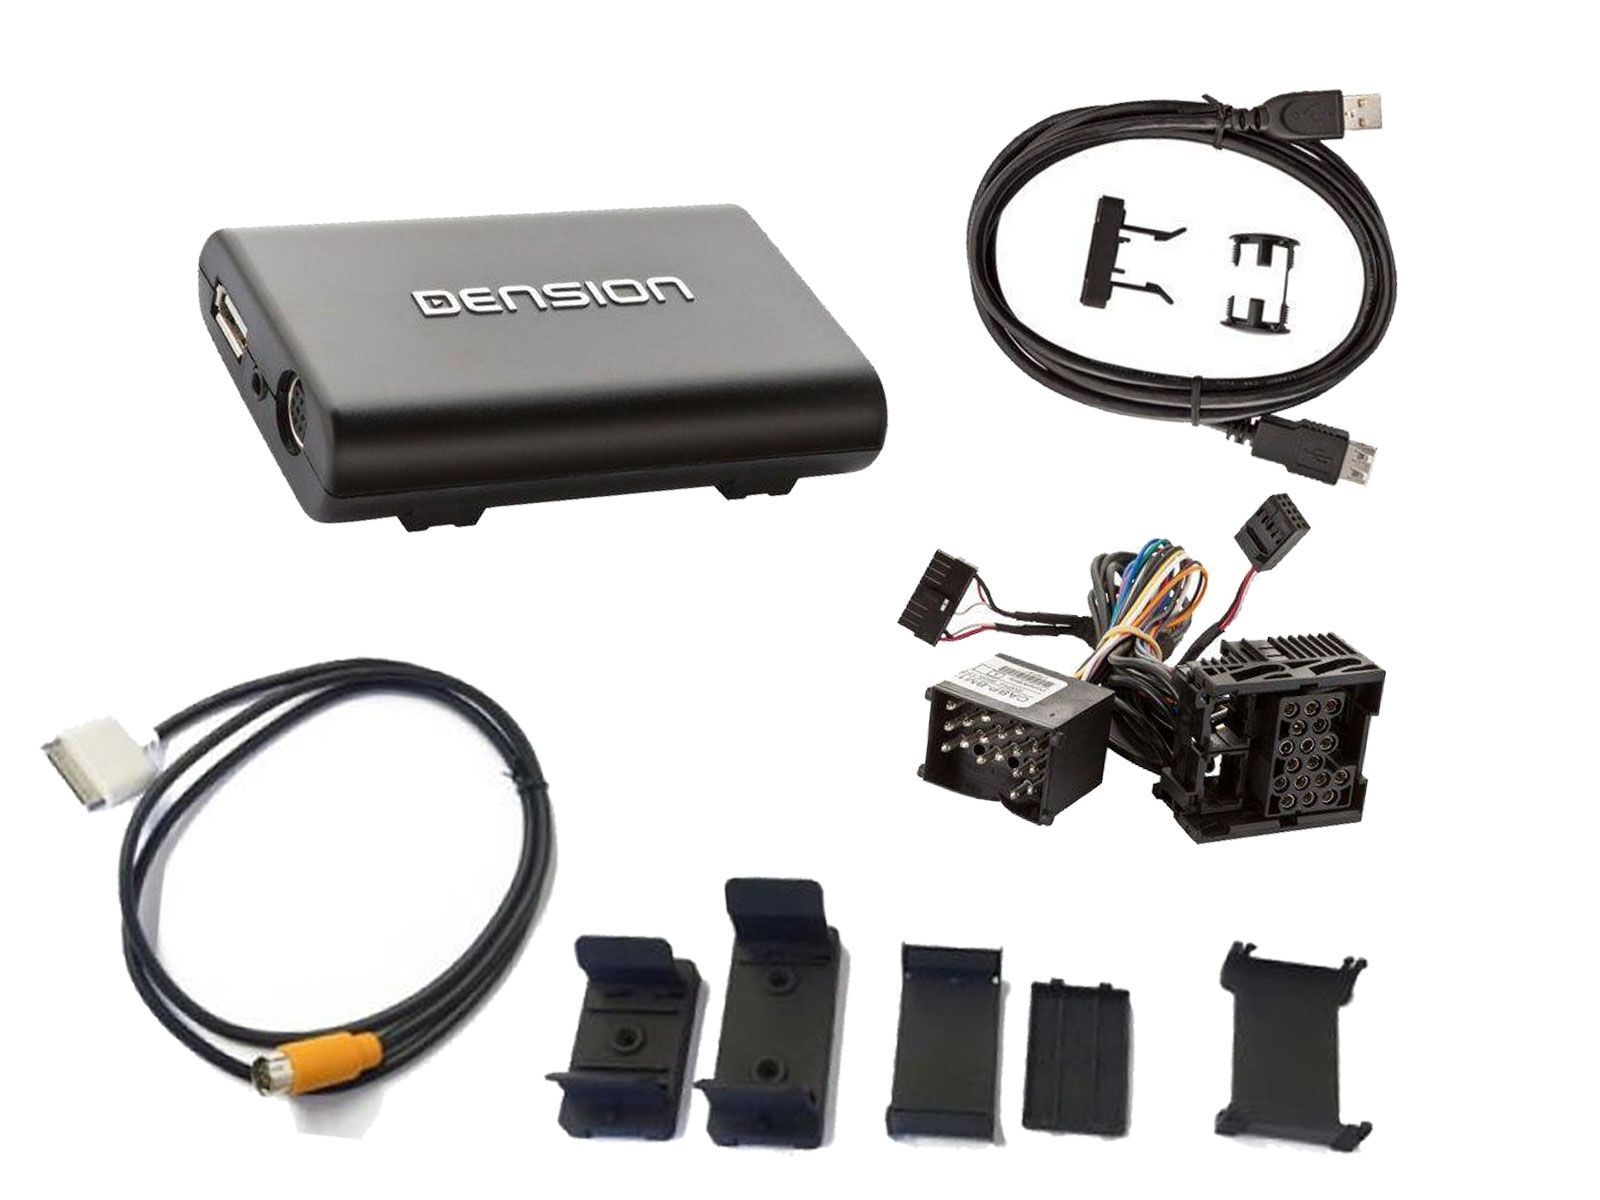 Dension Gateway 300 + Dock Cable - iPod / iPhone / USB / AUX Interface - BMW mit 17 PIN Rundk.